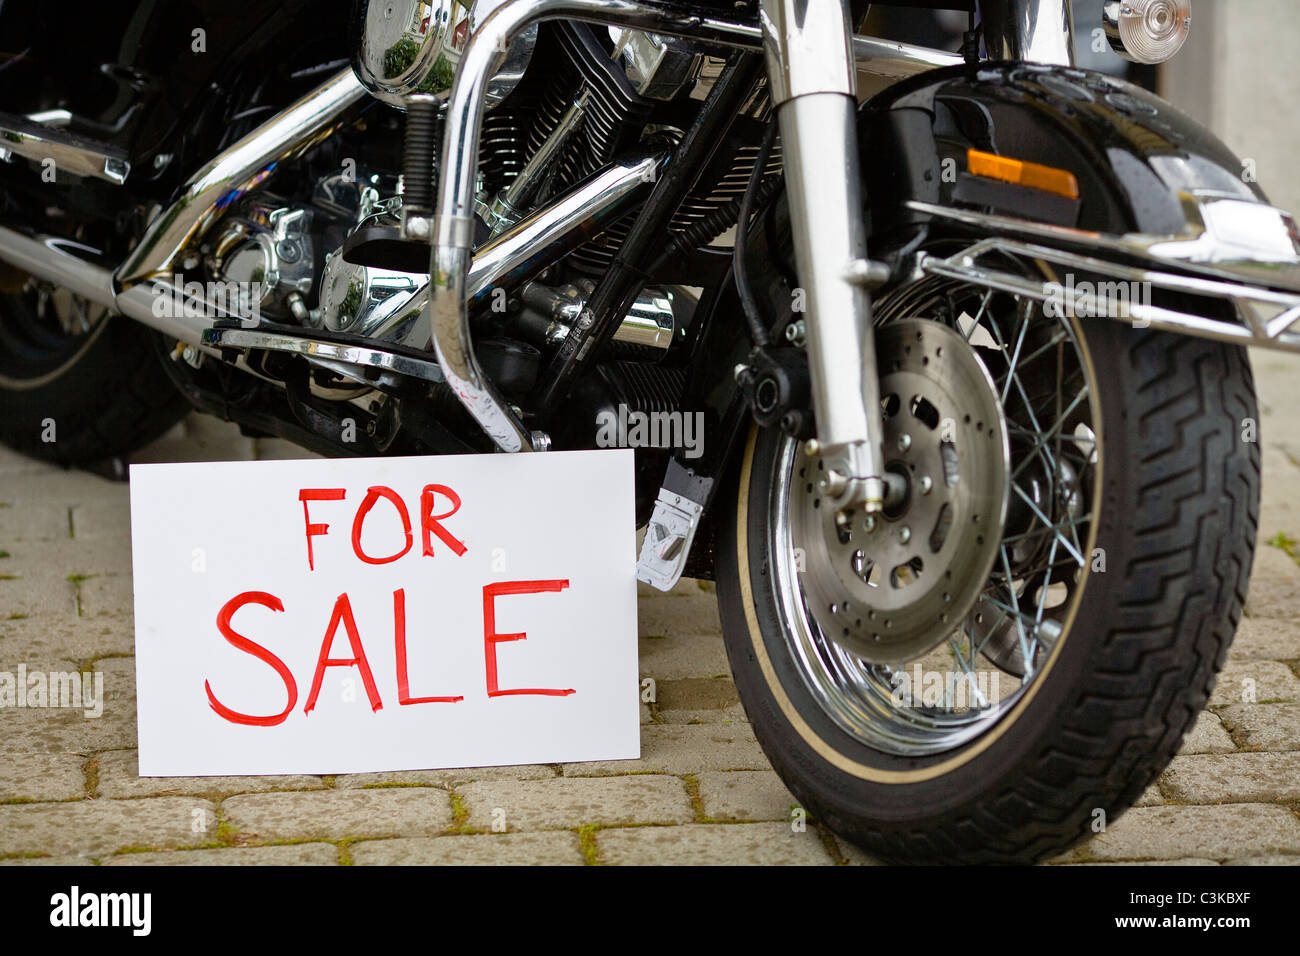 Vintage motorbike with for sale sign Stock Photo